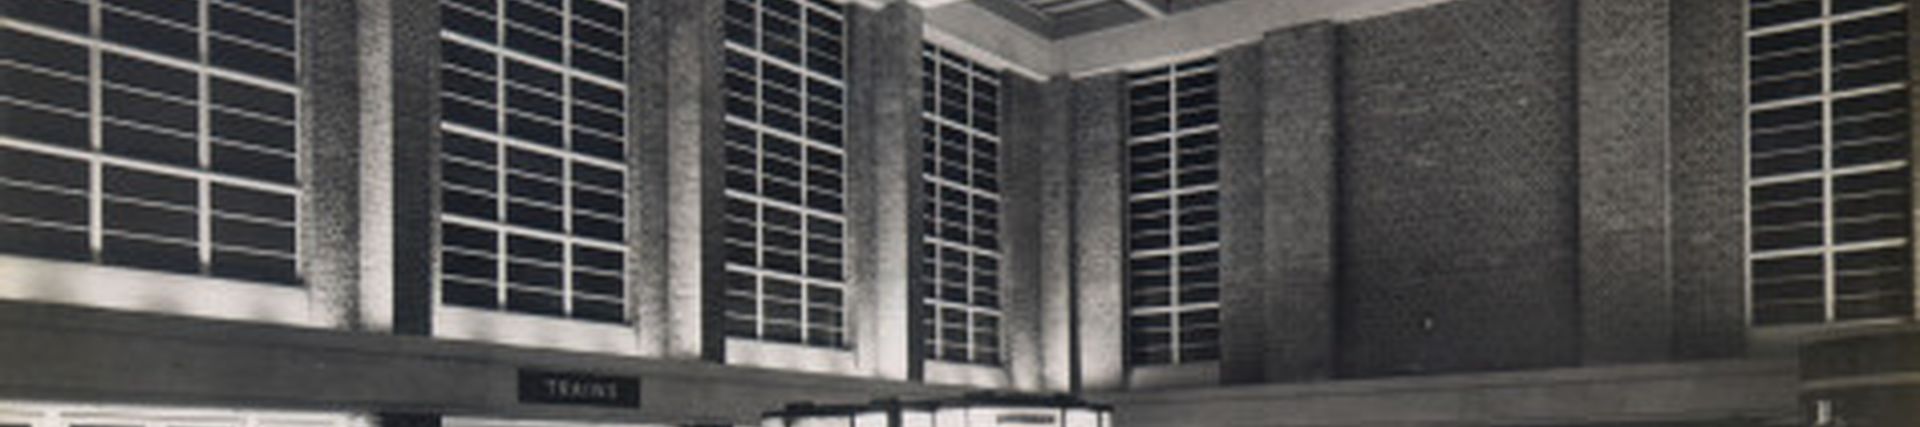 Black and white photo of old station ticket hall taken at night